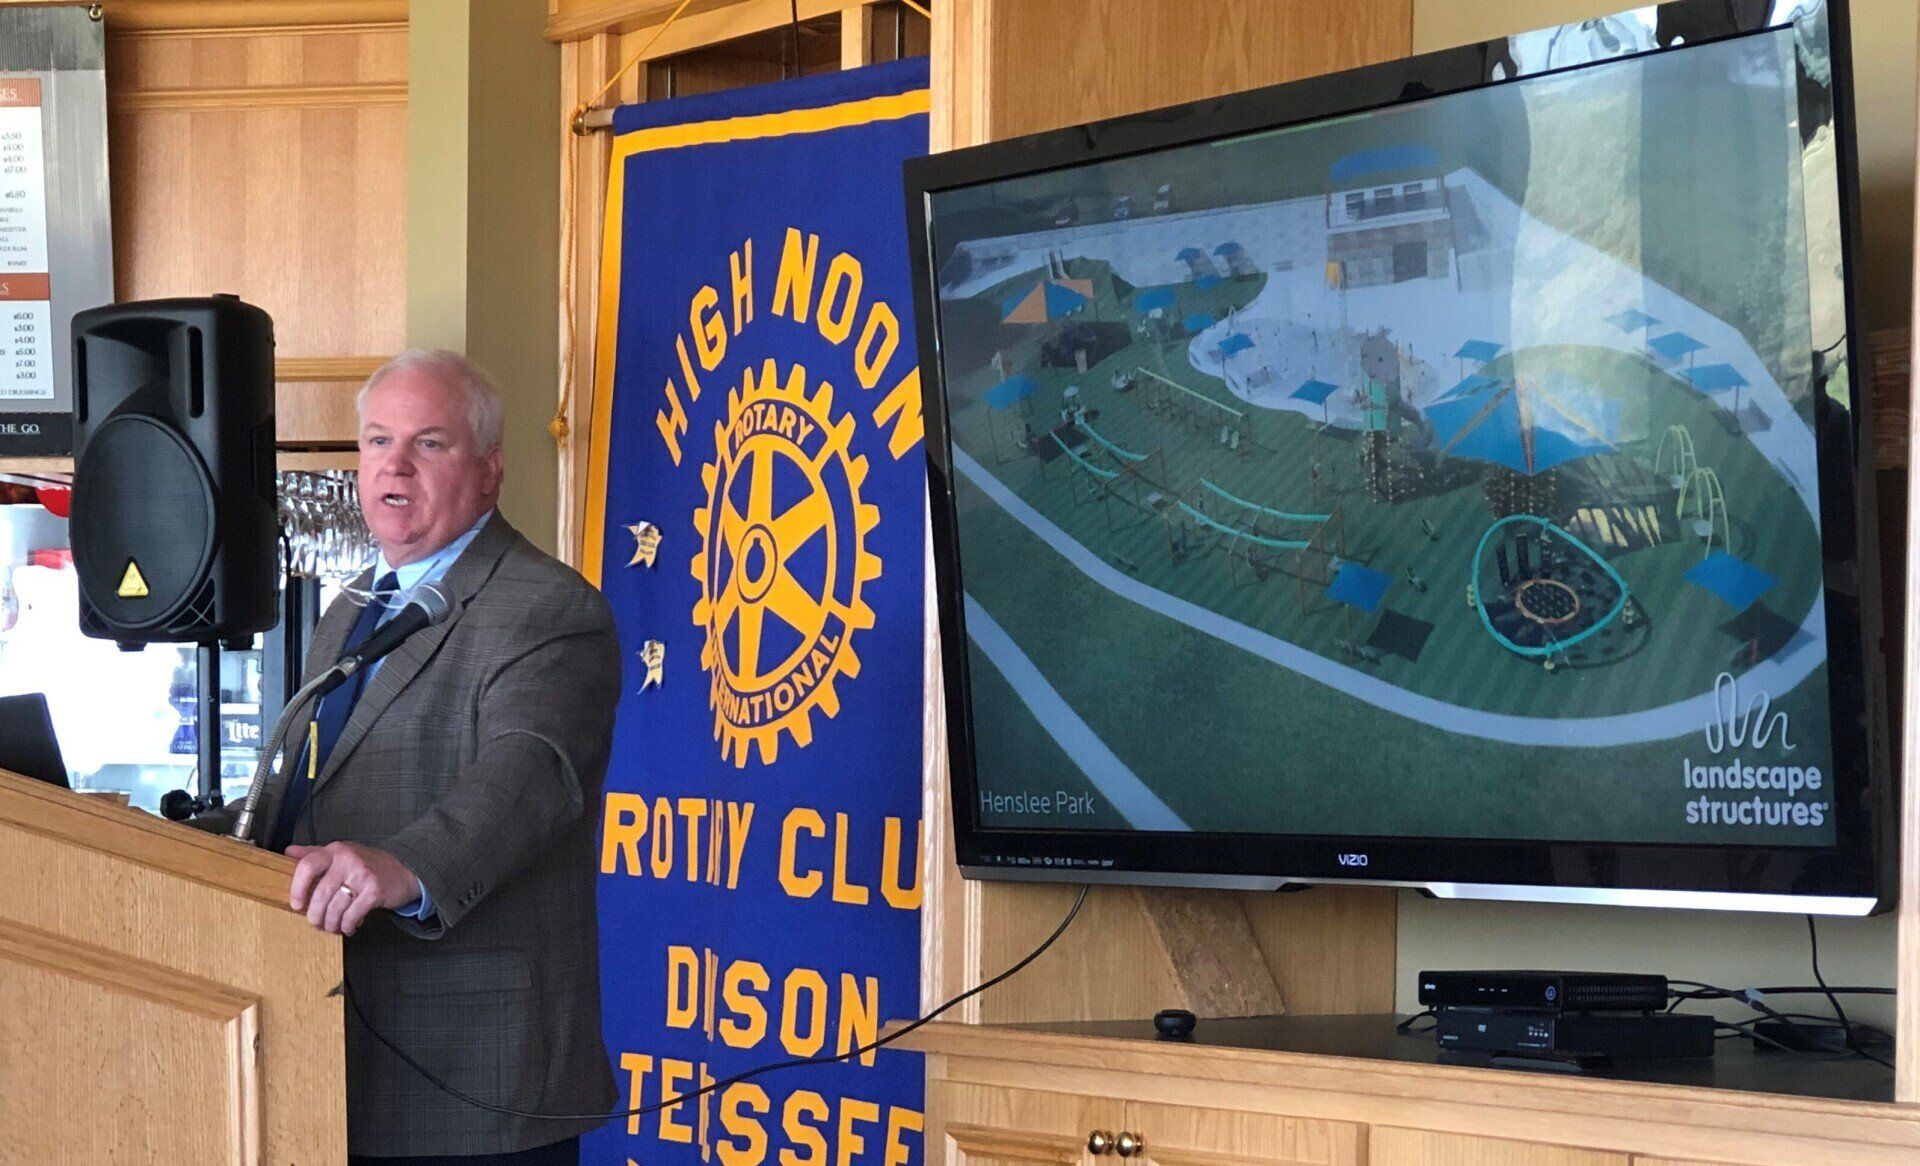 Dickson Mayor Don L. Weiss Jr. discusses several projects with the High Noon Rotary Club on Wednesday, Oct. 7.